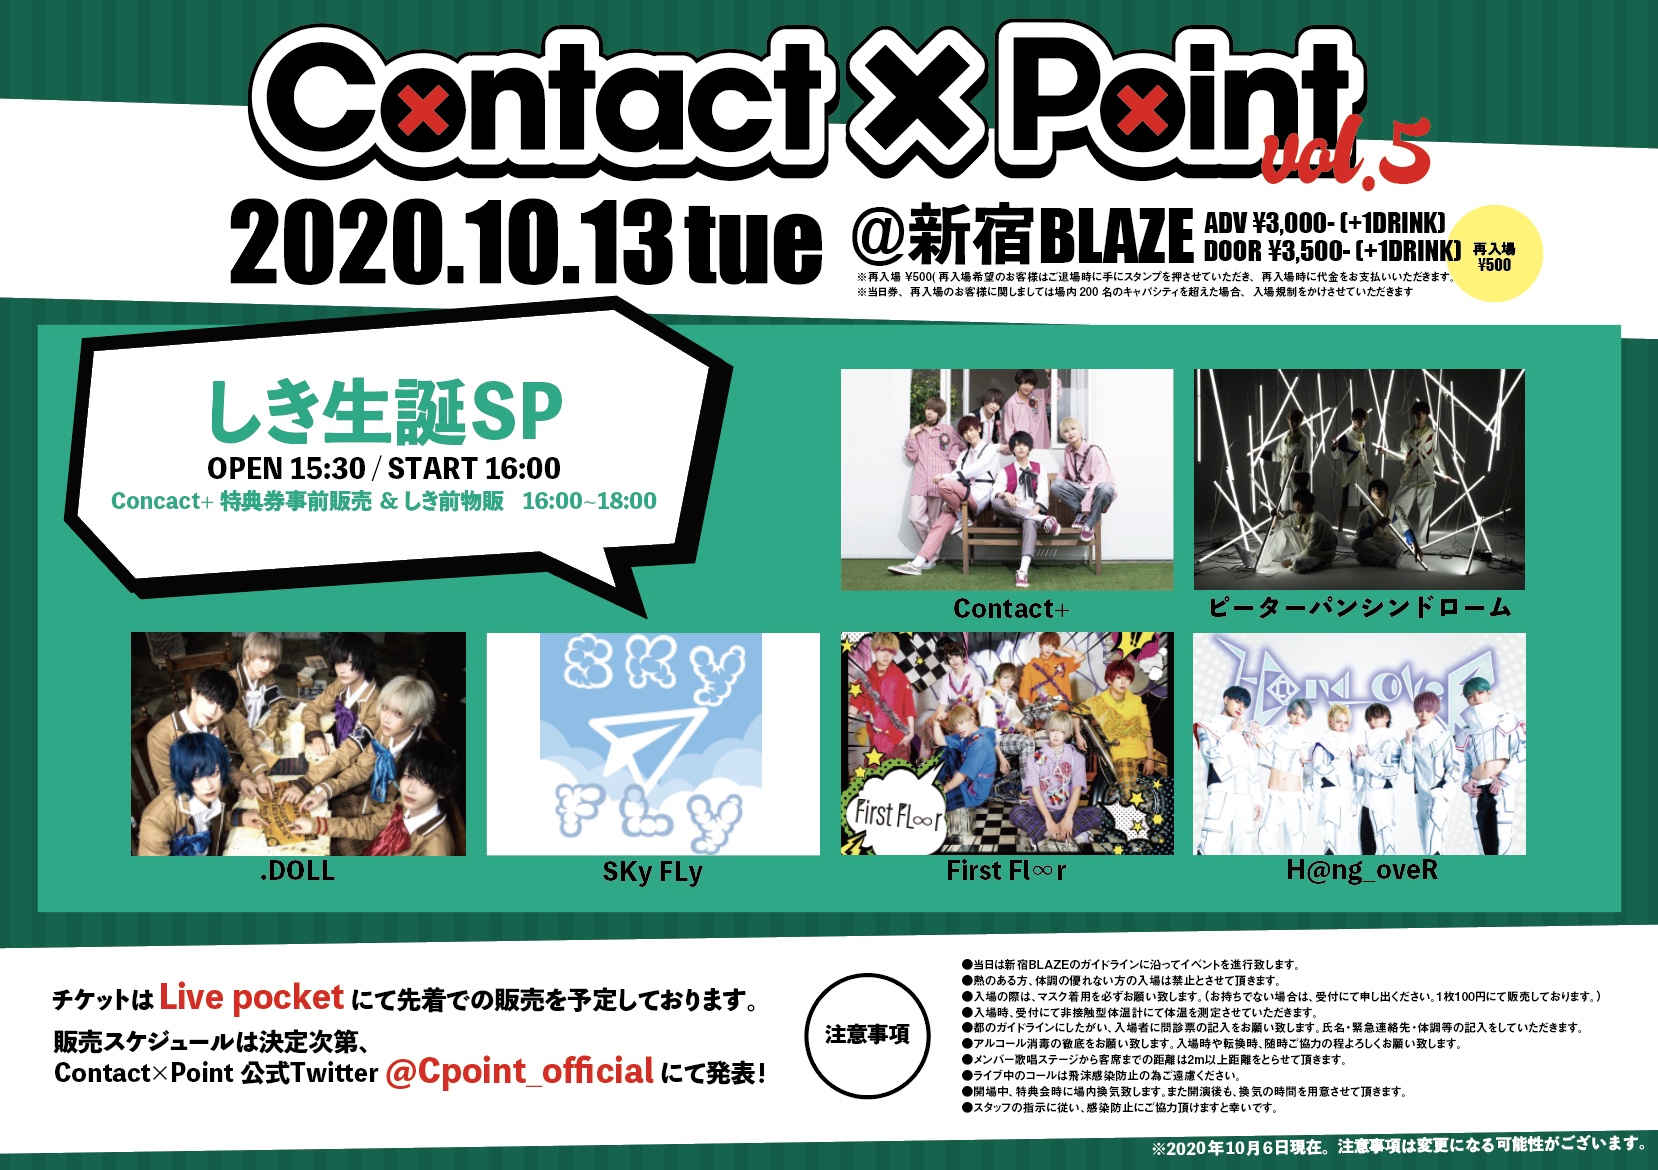 Contact 主催 Contact Point Vol 5 しき生誕sp Contact